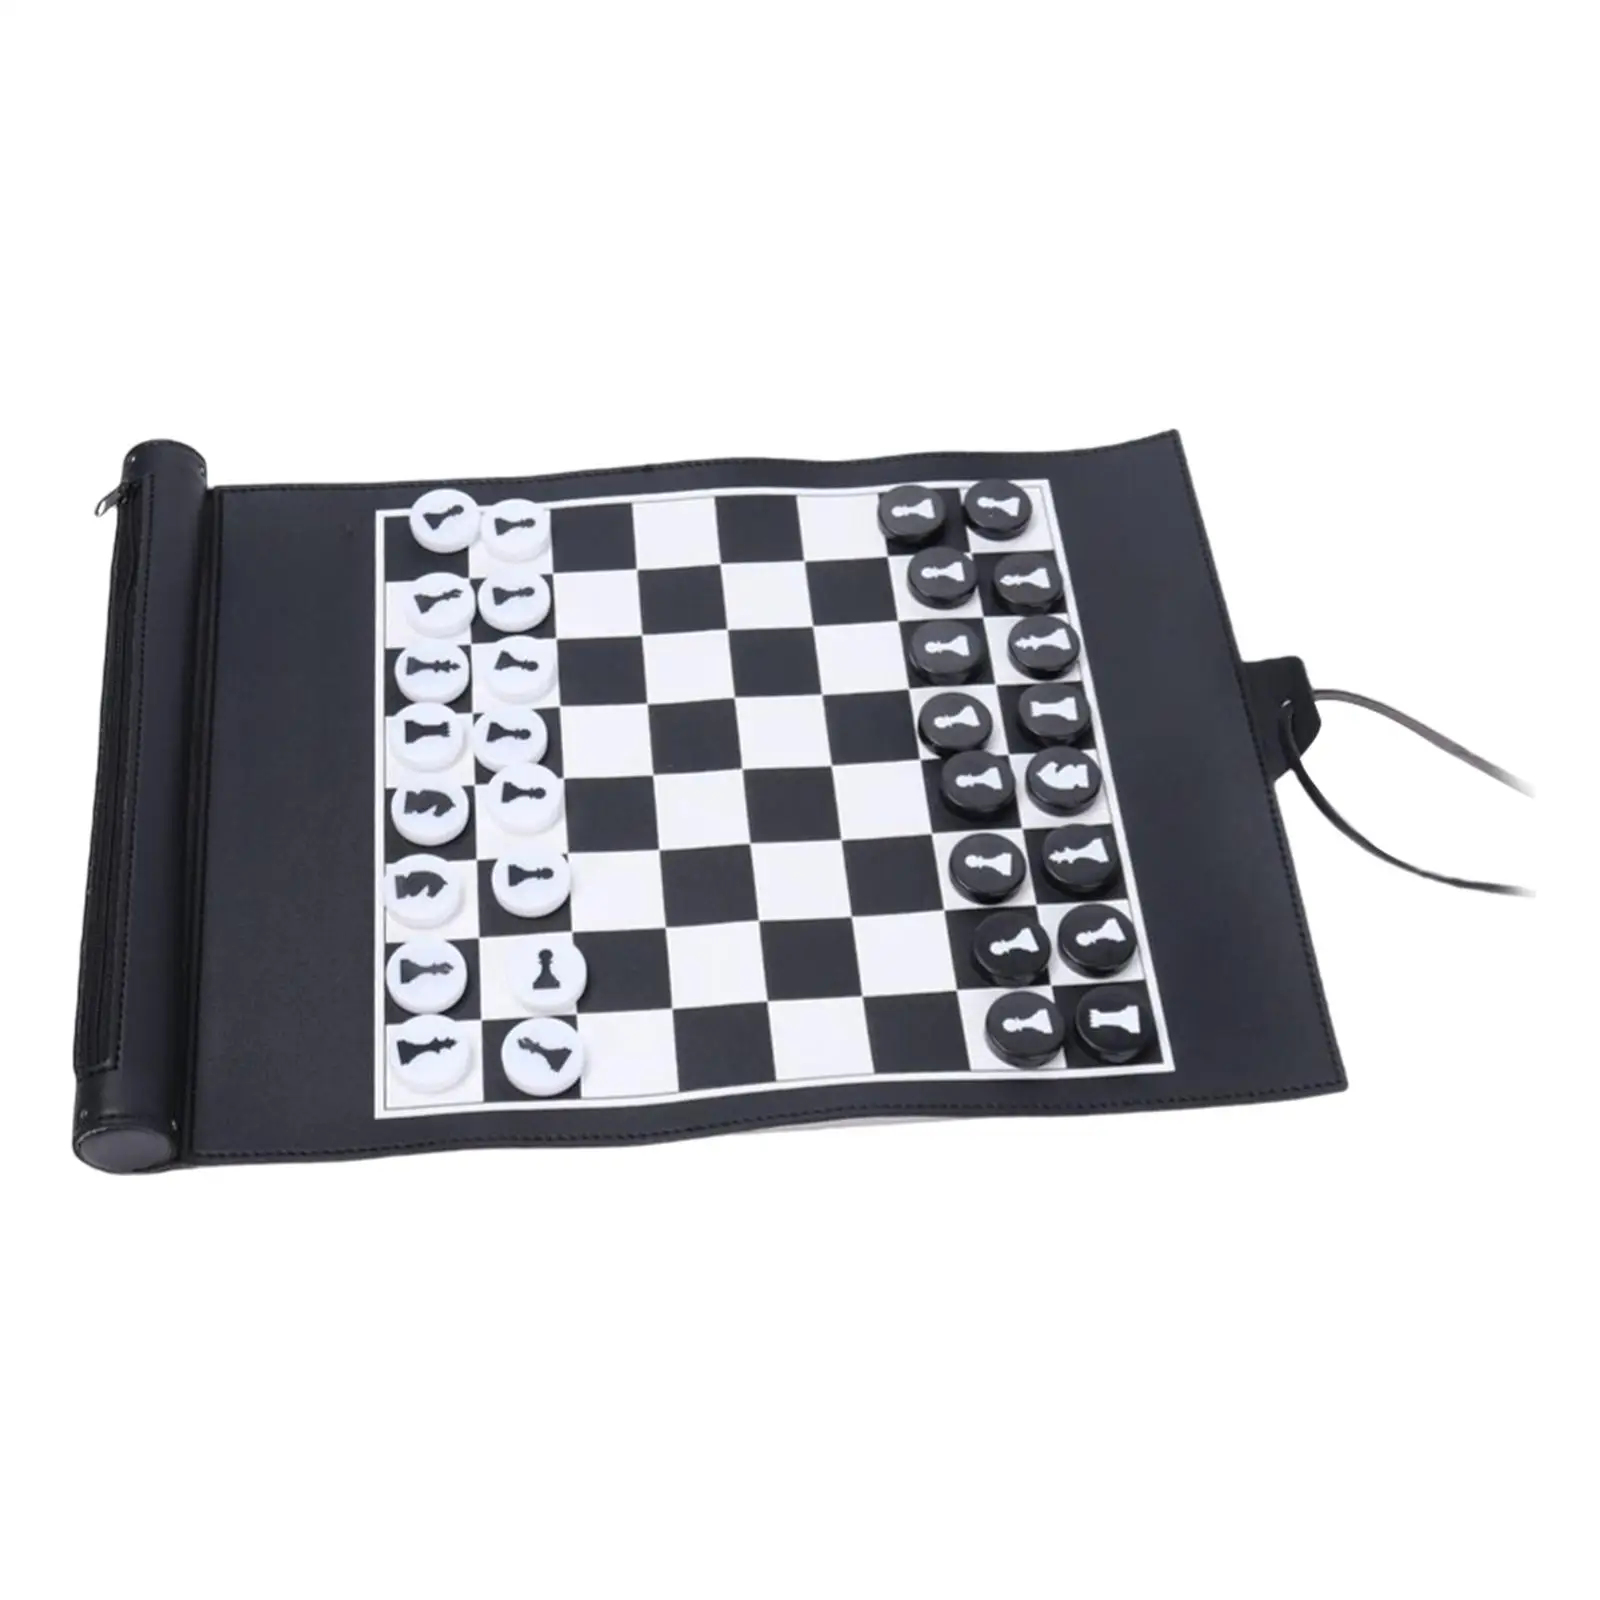 Foldable Traditional Chess, Roll up Chess Set 32 Black White Chess Pieces for Entertainment All Levels Travel Games Teens Family